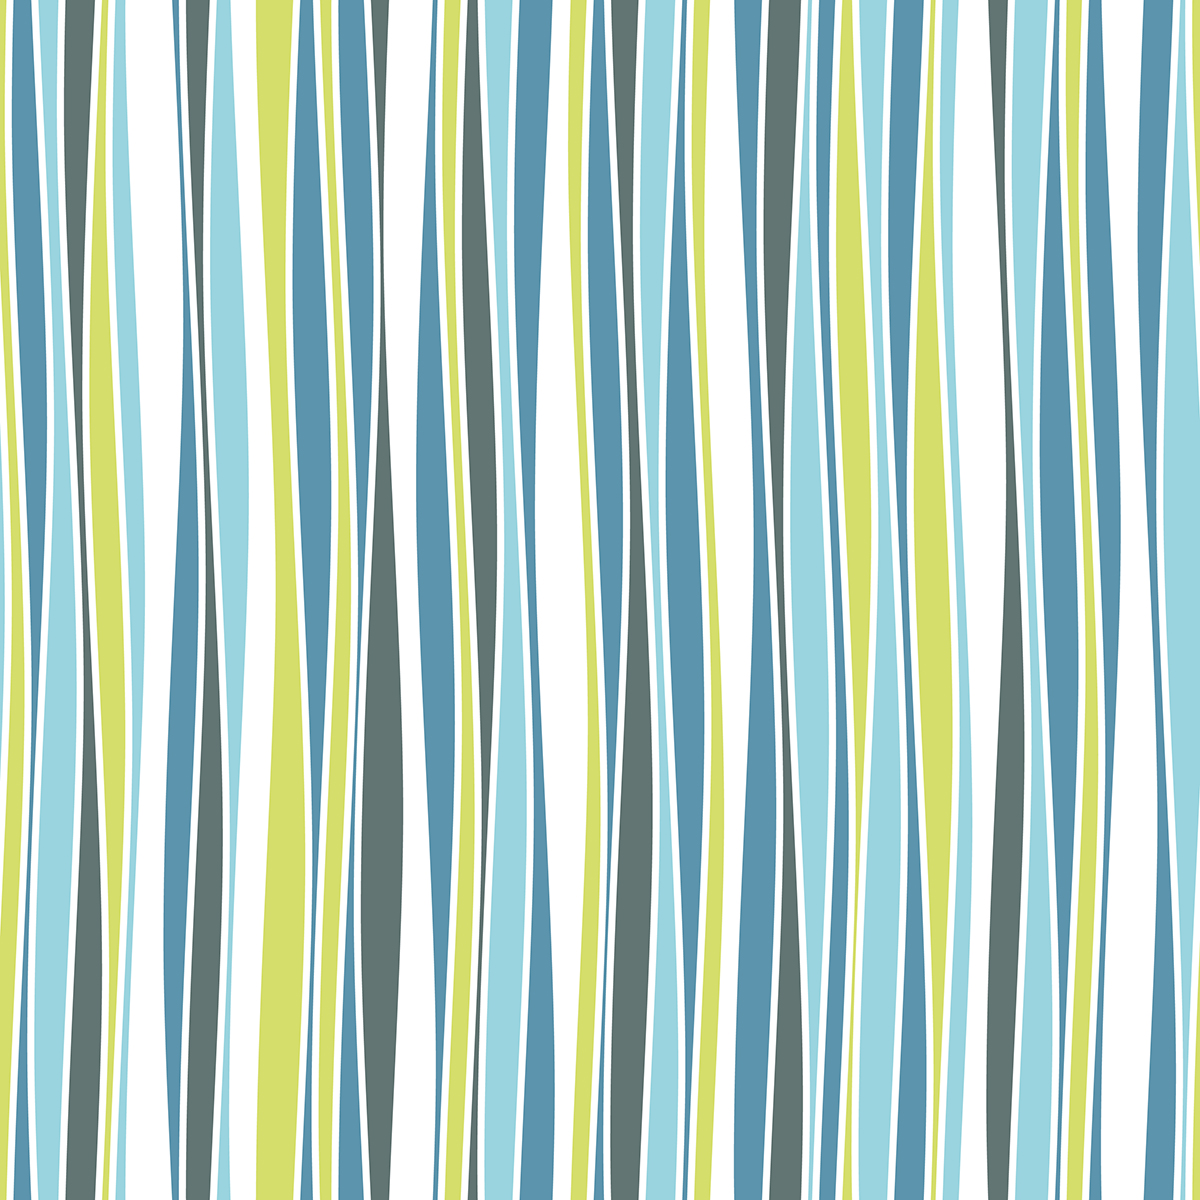 A pattern of blue and green vertical lines